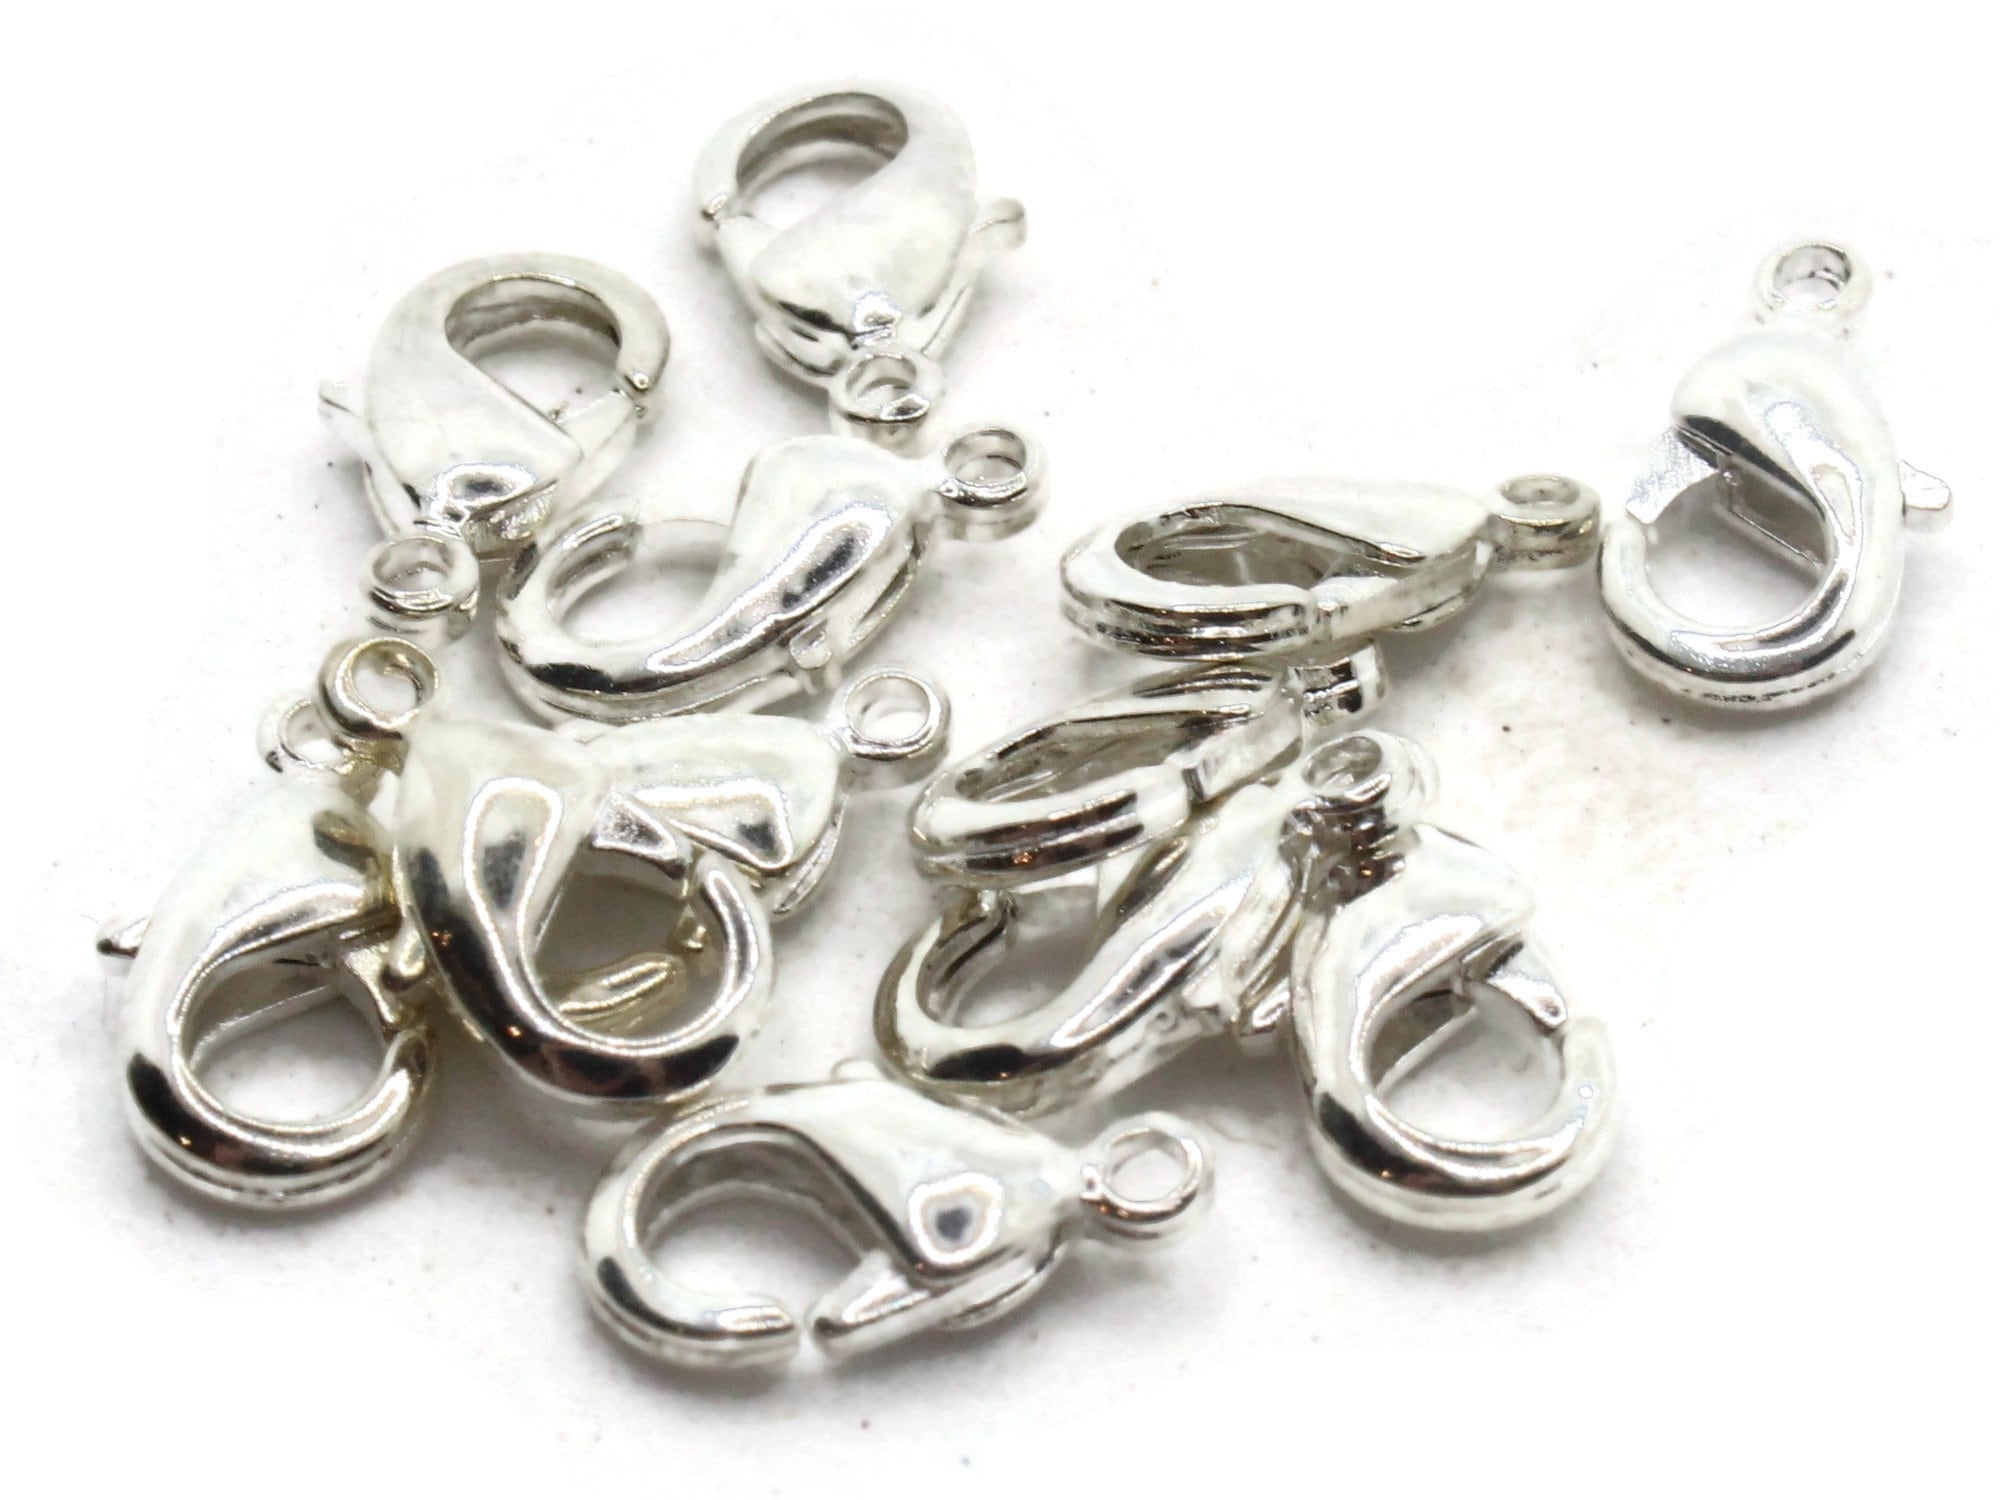 Bead Landing Lobster Claw Clasps - Silver - 12 ct